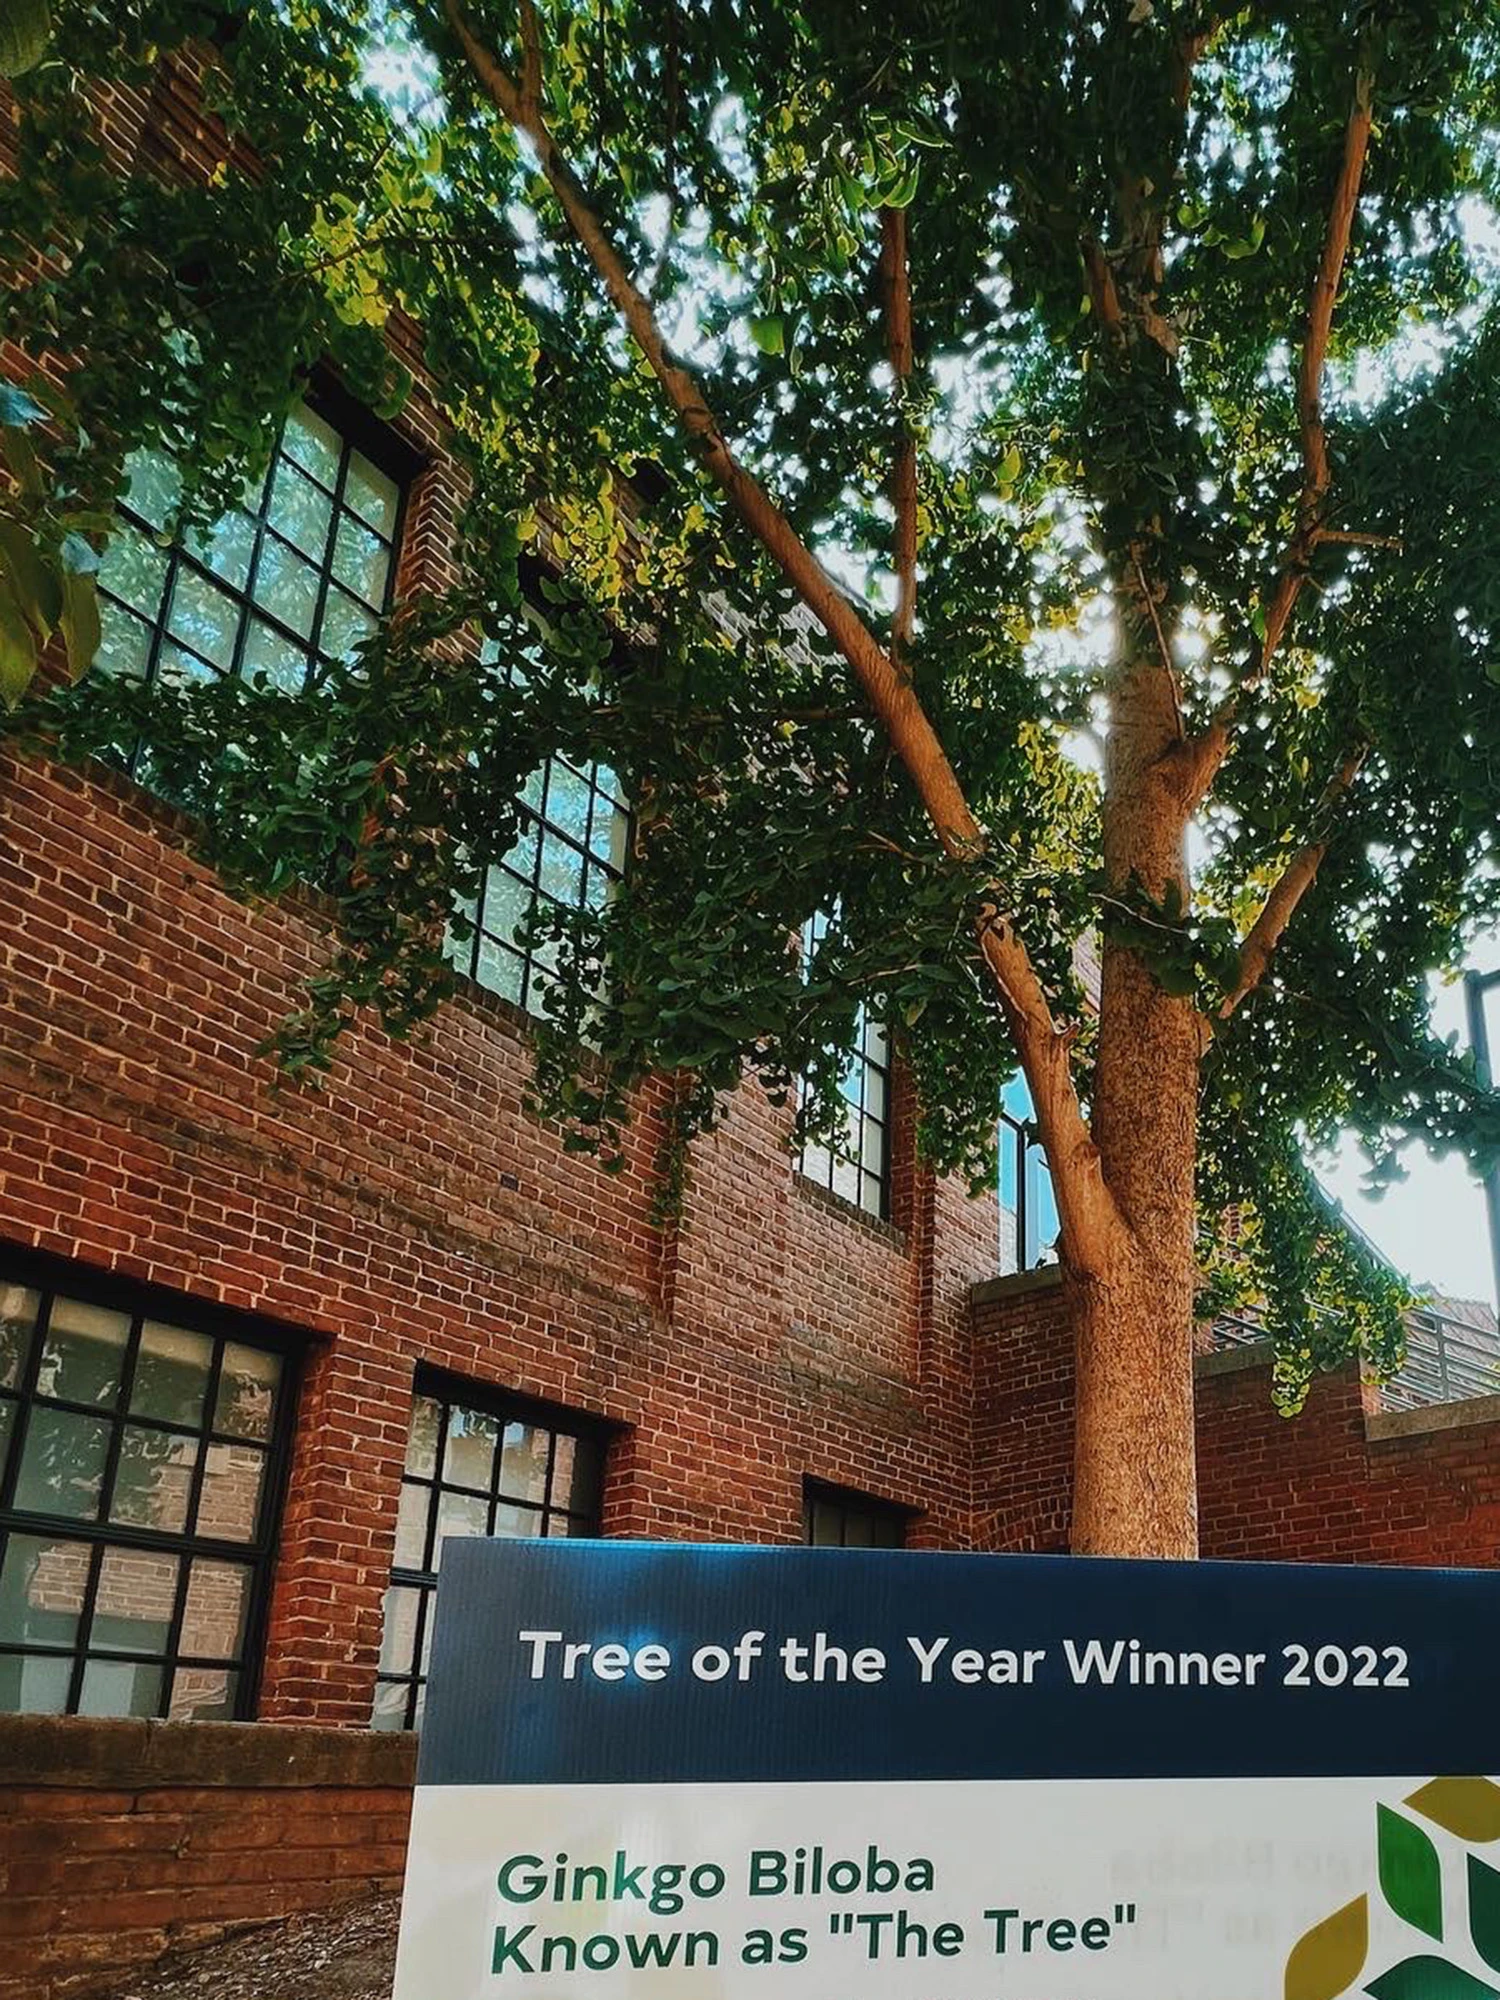 A popular Ginkgo biloba tree on NC State's campus, with a plaque nearby announcing its title as "Tree of the Year" for 2022.